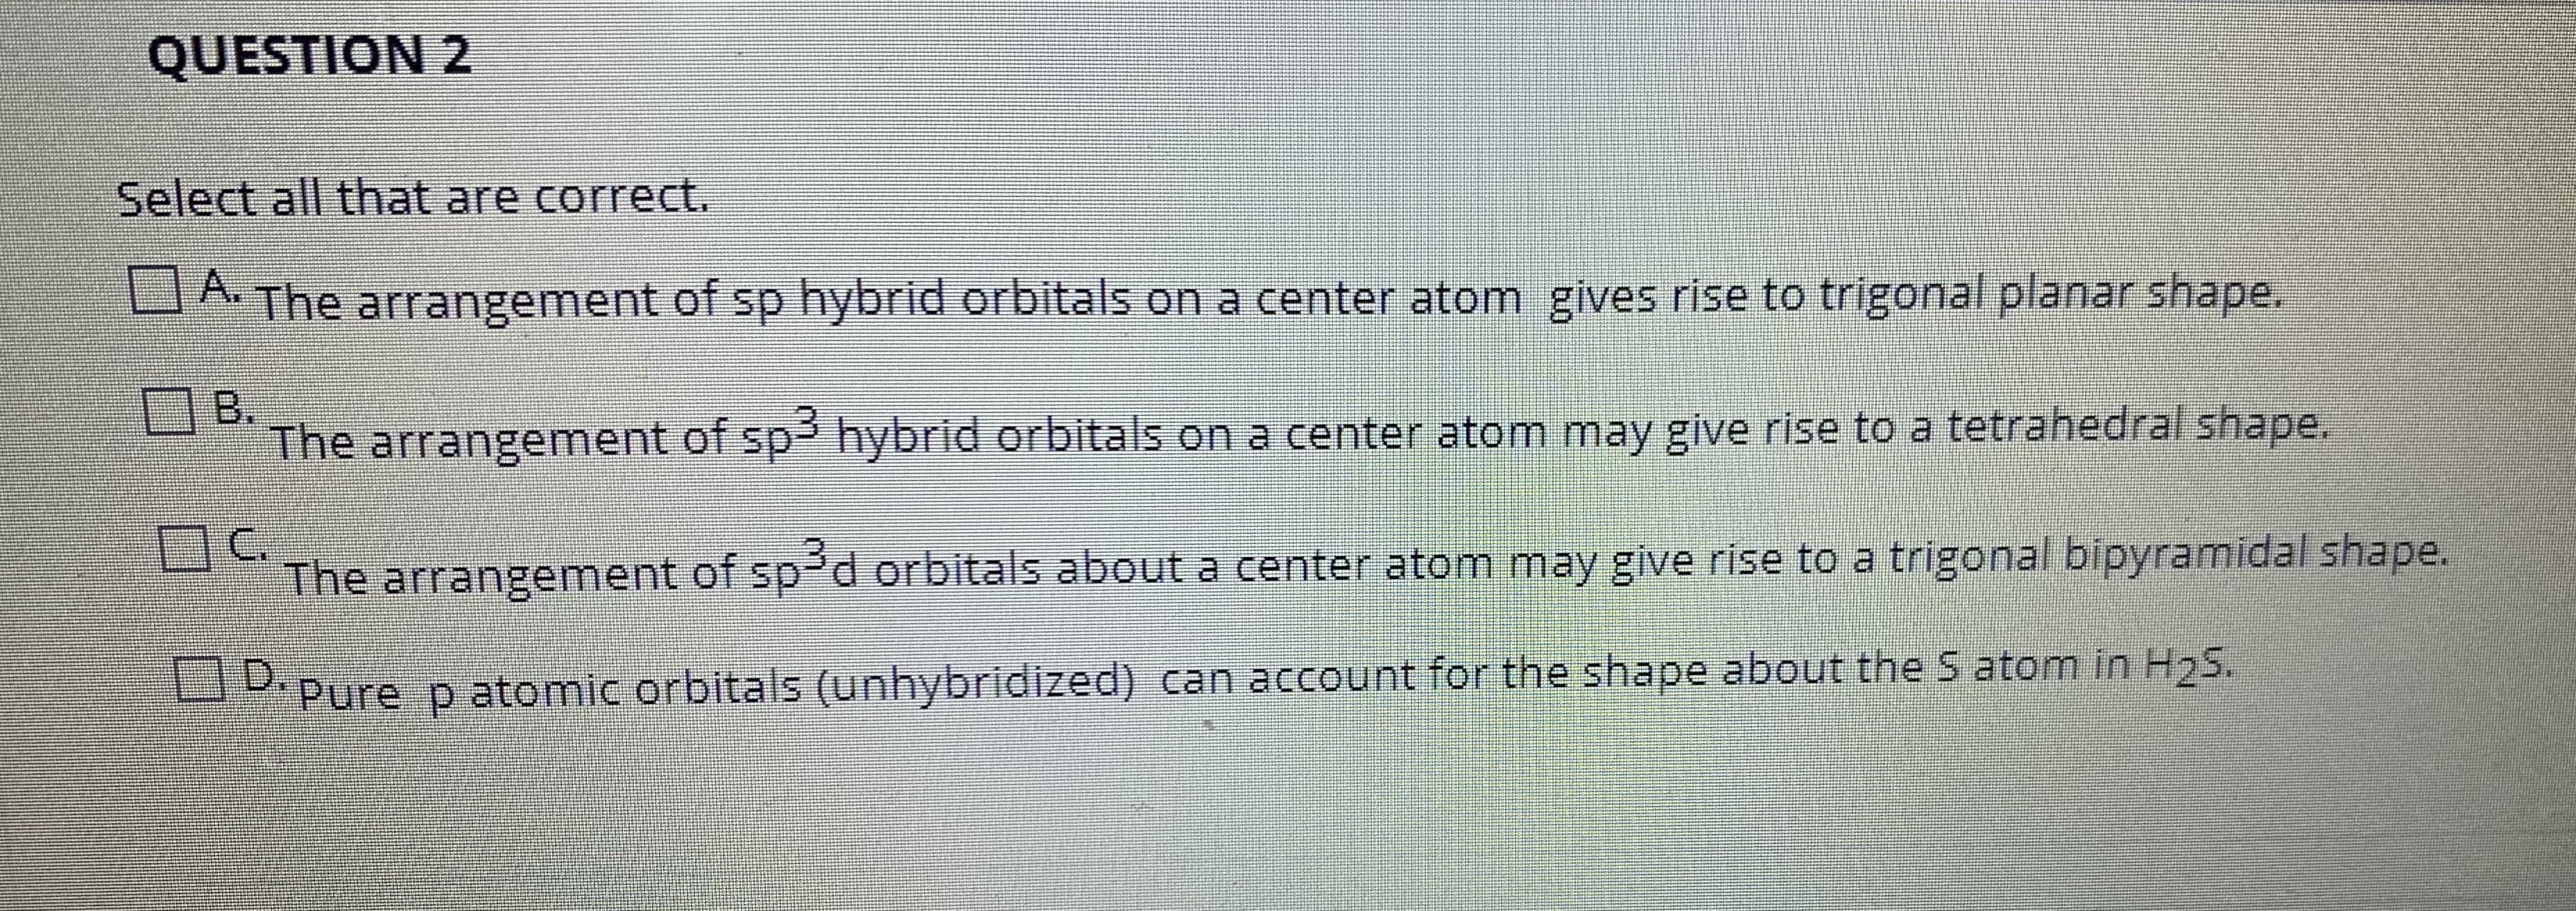 Select all that are correct.
A. The arrangement of sp hybrid orbitals on a center atom gives rise to trigonal planar shape.
OB.
The arrangement of sp3 hybrid orbitals on a center atom may give rise to a tetrahedral shape.
